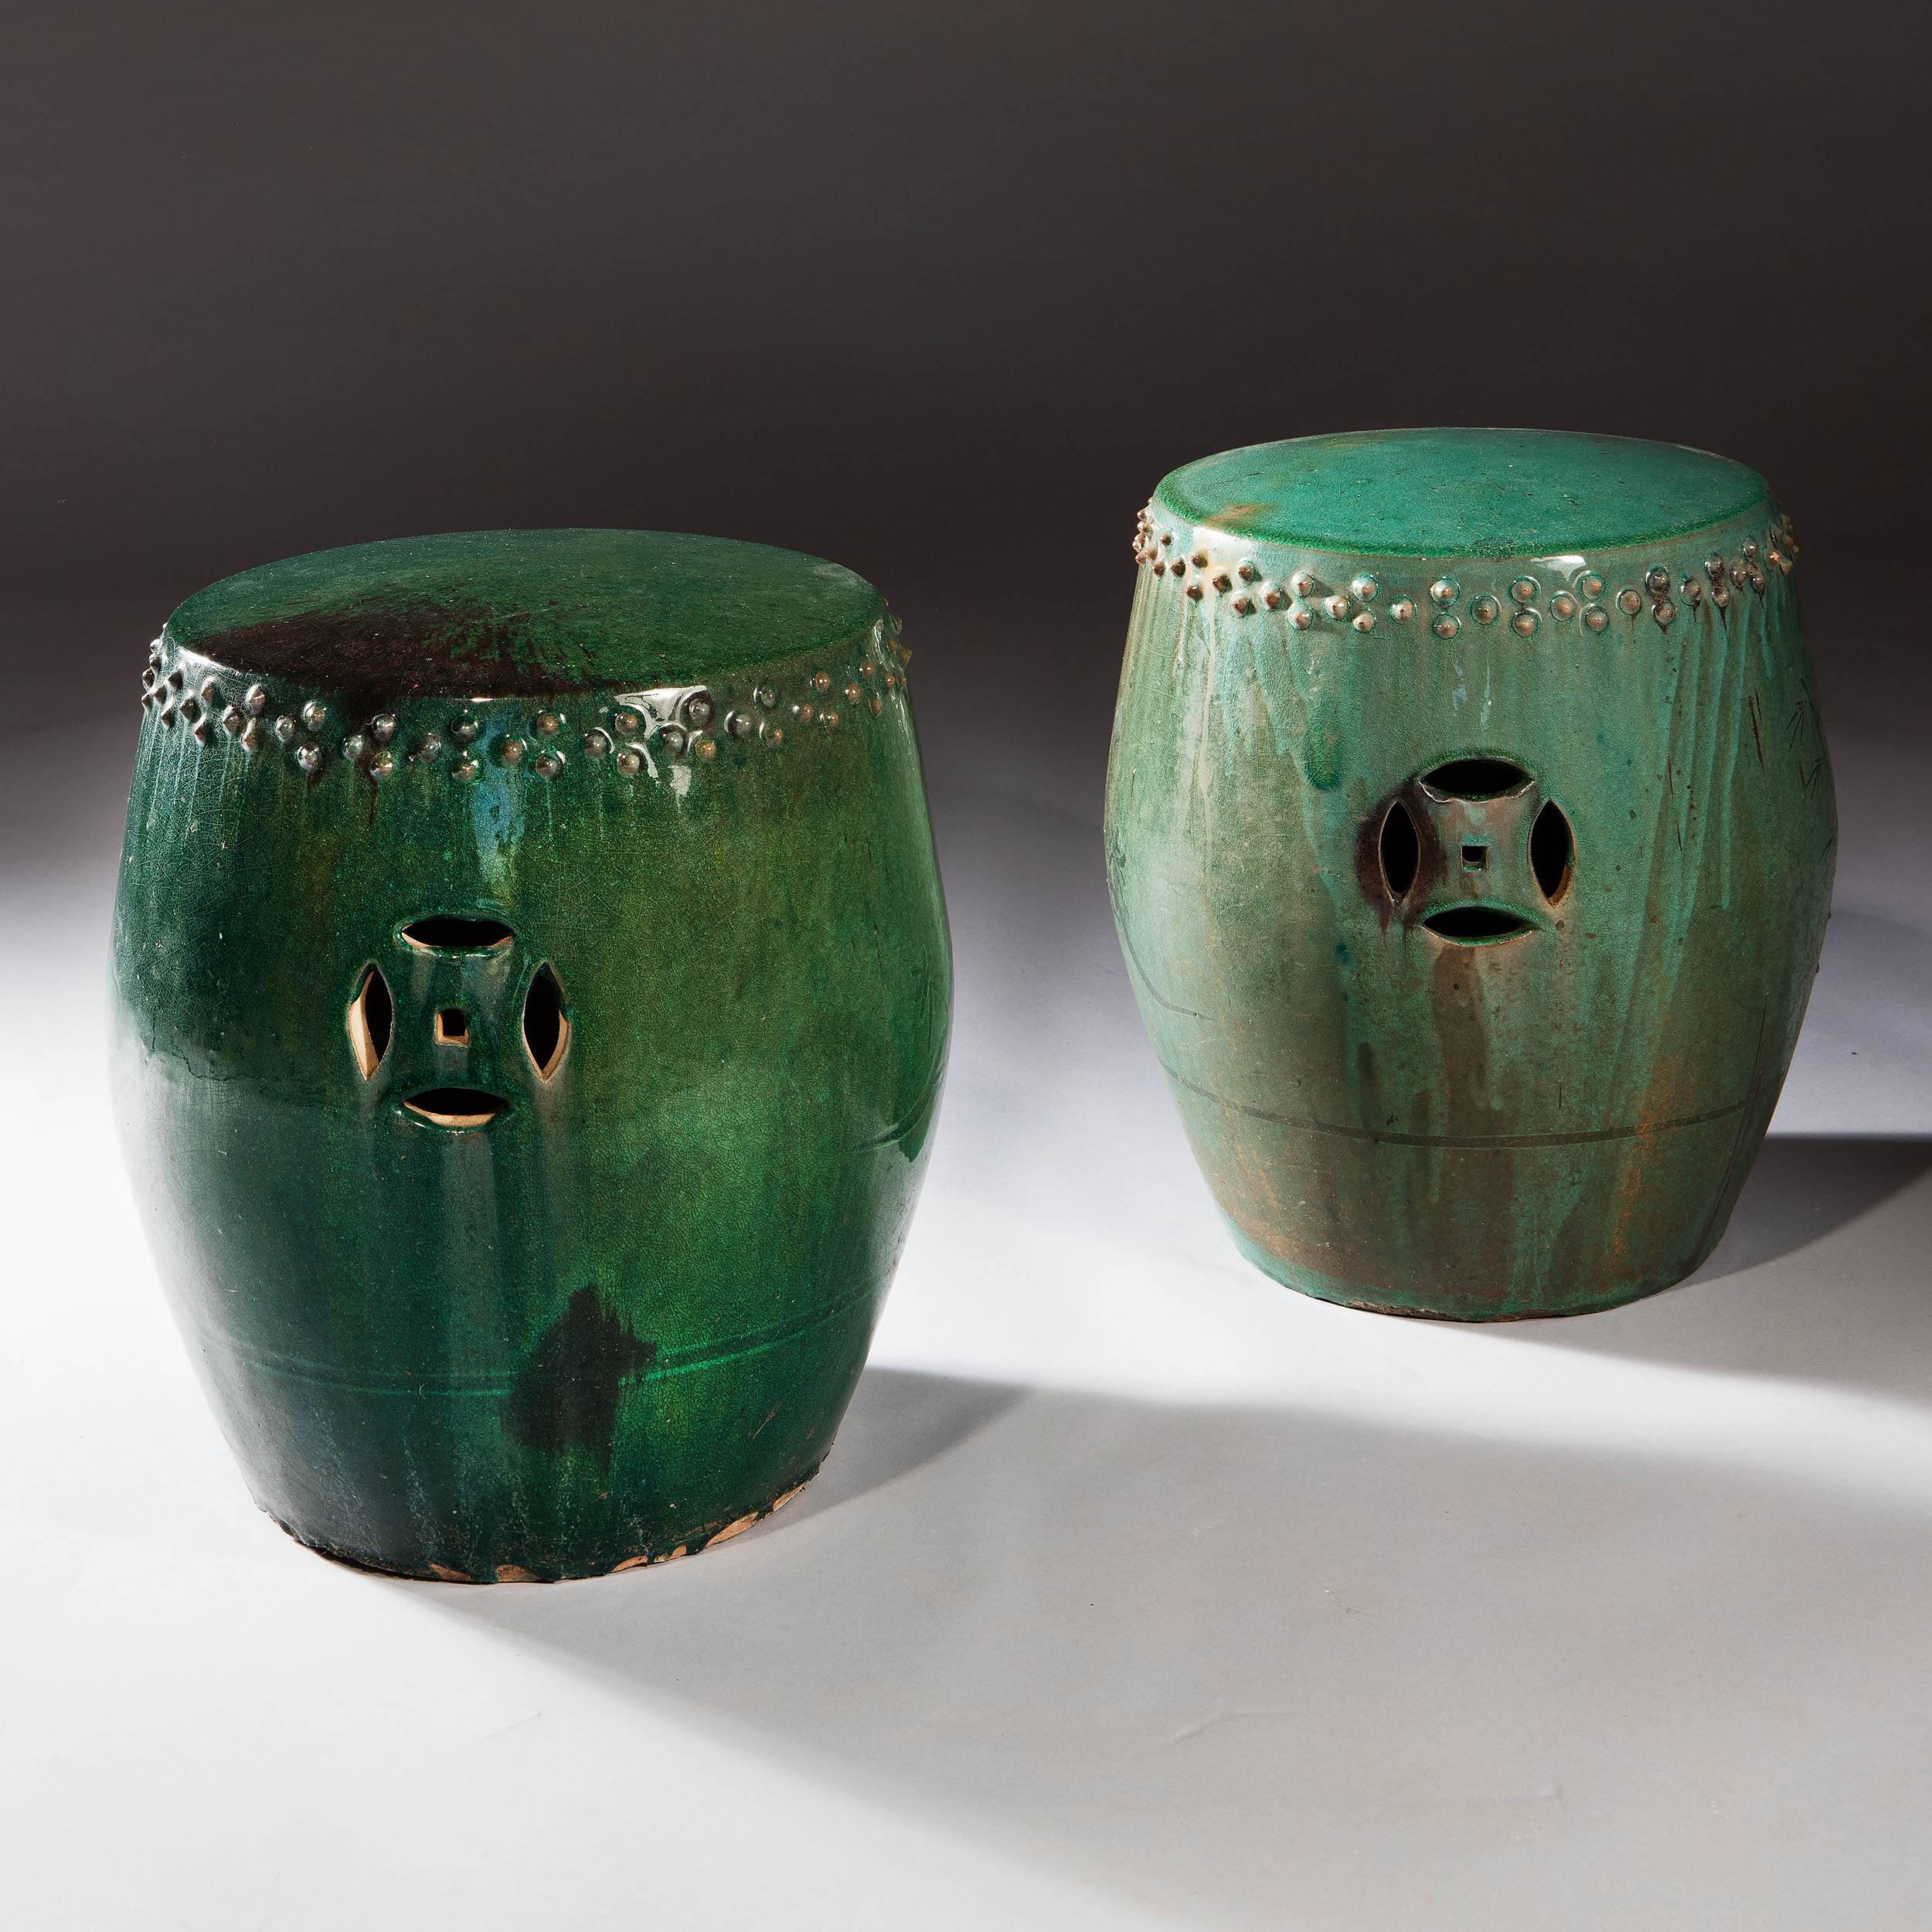 A highly decorative pair of vibrant green glazed Chinese pottery stools, the slightly domed seats above a frieze of points, pierced geometric motifs in the sides and a small floral detail. 

Measures: Height 16.5in, 42cm 
Diameter 14in, 35.5cm.